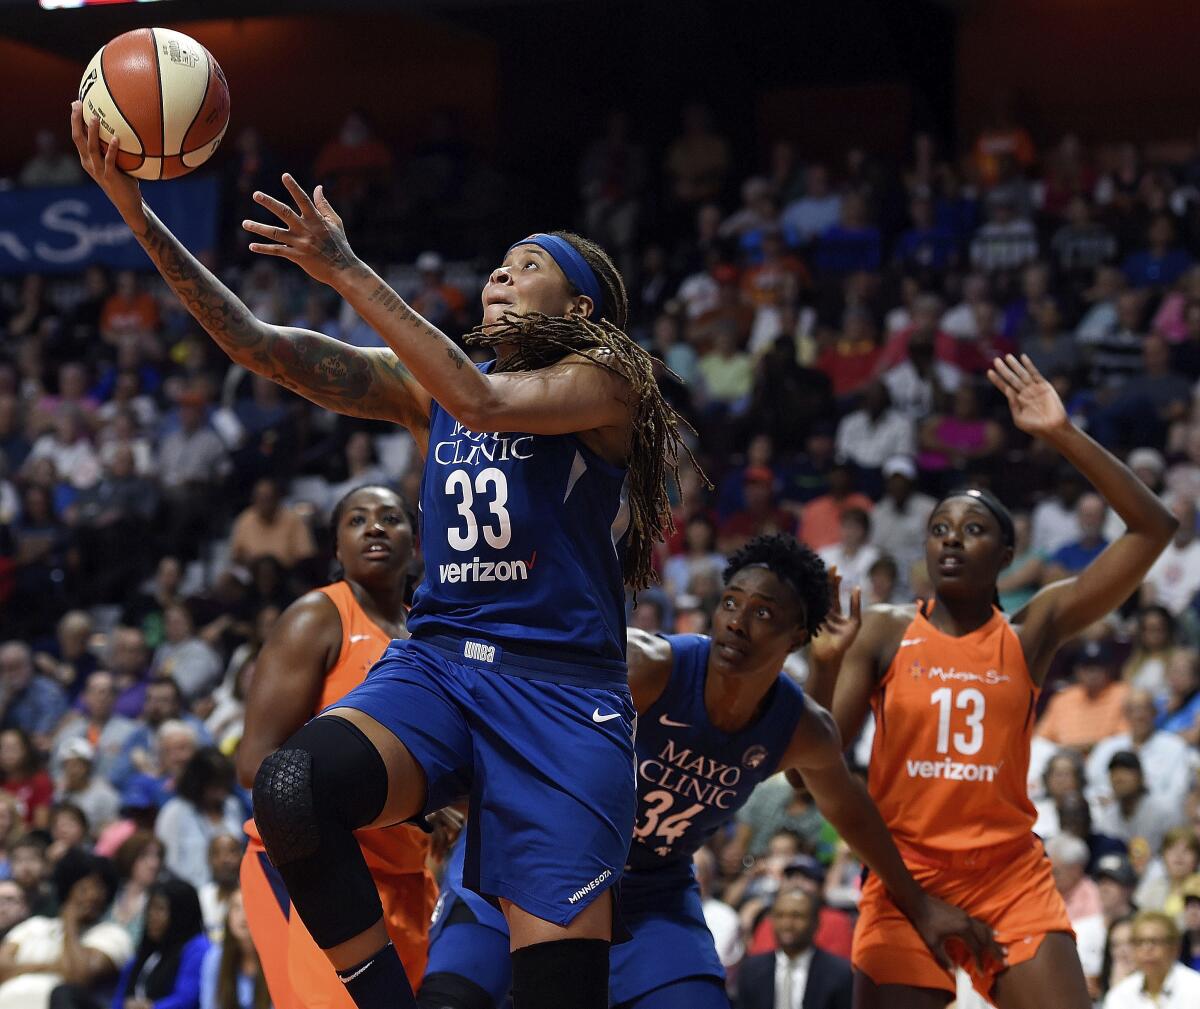 FILE - In this June 9, 2018, file photo, Minnesota Lynx guard Seimone Augustus (33) uses a screen from teammate Sylvia Fowles (34) to get a clear drive to the basket against the Connecticut Sun during the first half of a WNBA basketball game in Uncasville, Conn. Seimone Augustus has retired from playing and will be an assistant coach for the Los Angeles Sparks, the team announced Thursday, May 13, 2021. (Sean D. Elliot/The Day via AP, File)